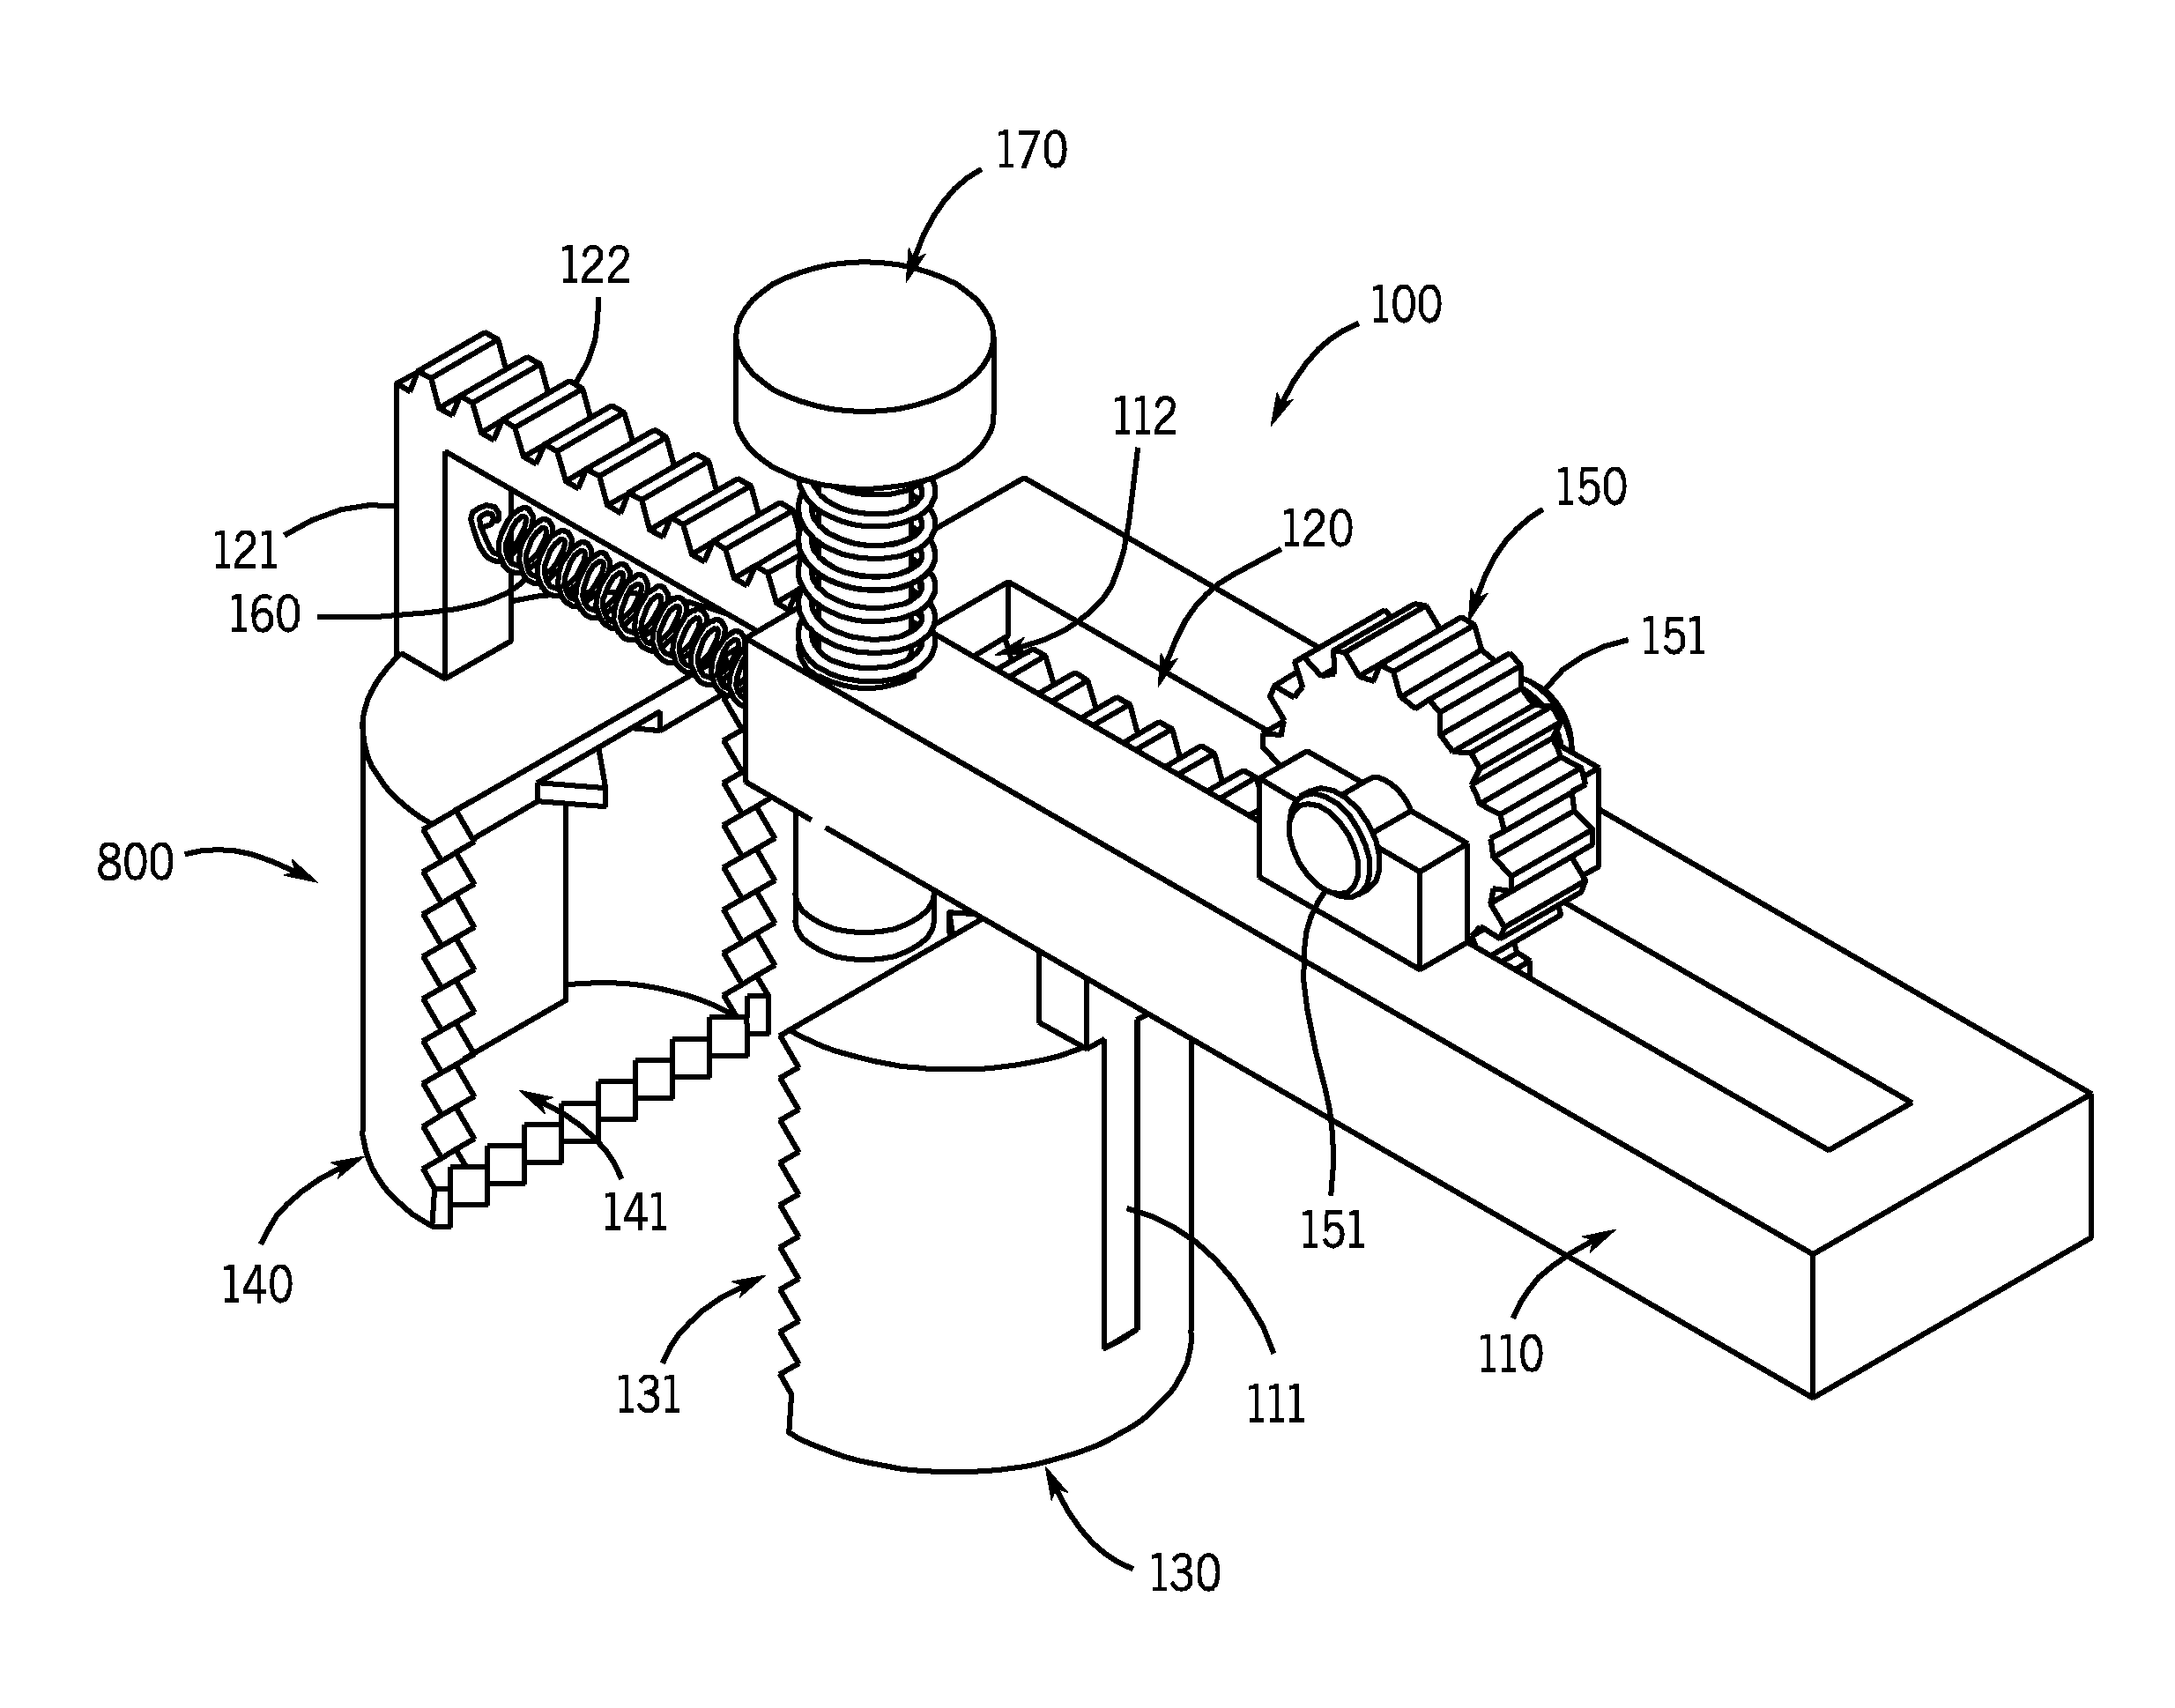 Sample collection device